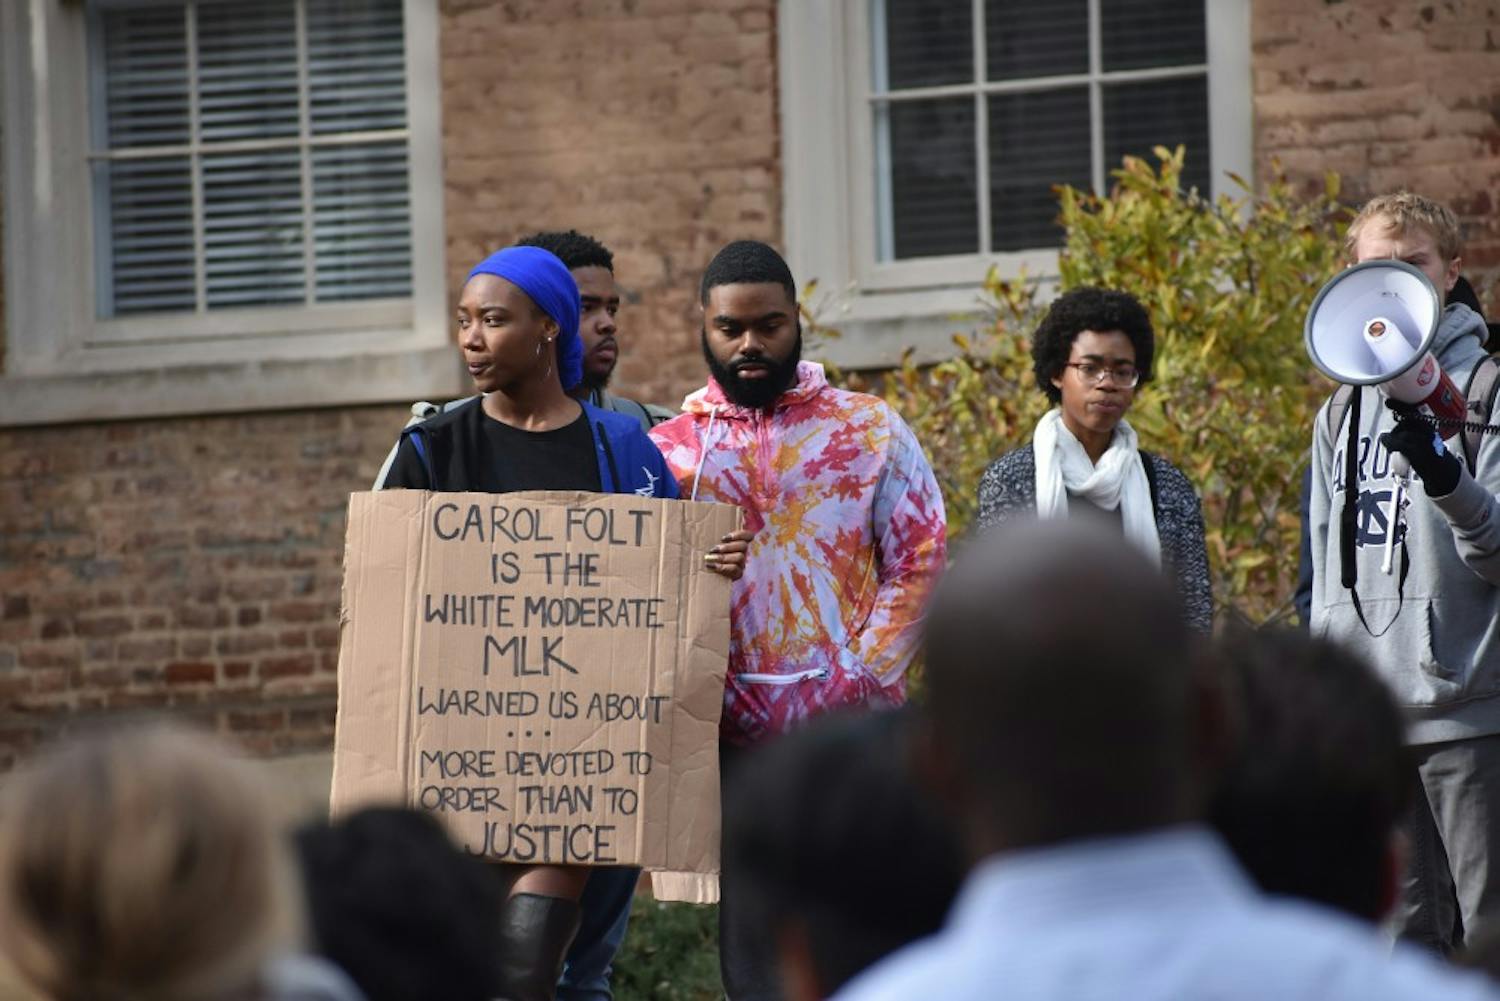 Angum Check, a columnist for the DTH, participated in the Silence Sam Rally at South Building on Nov. 14.